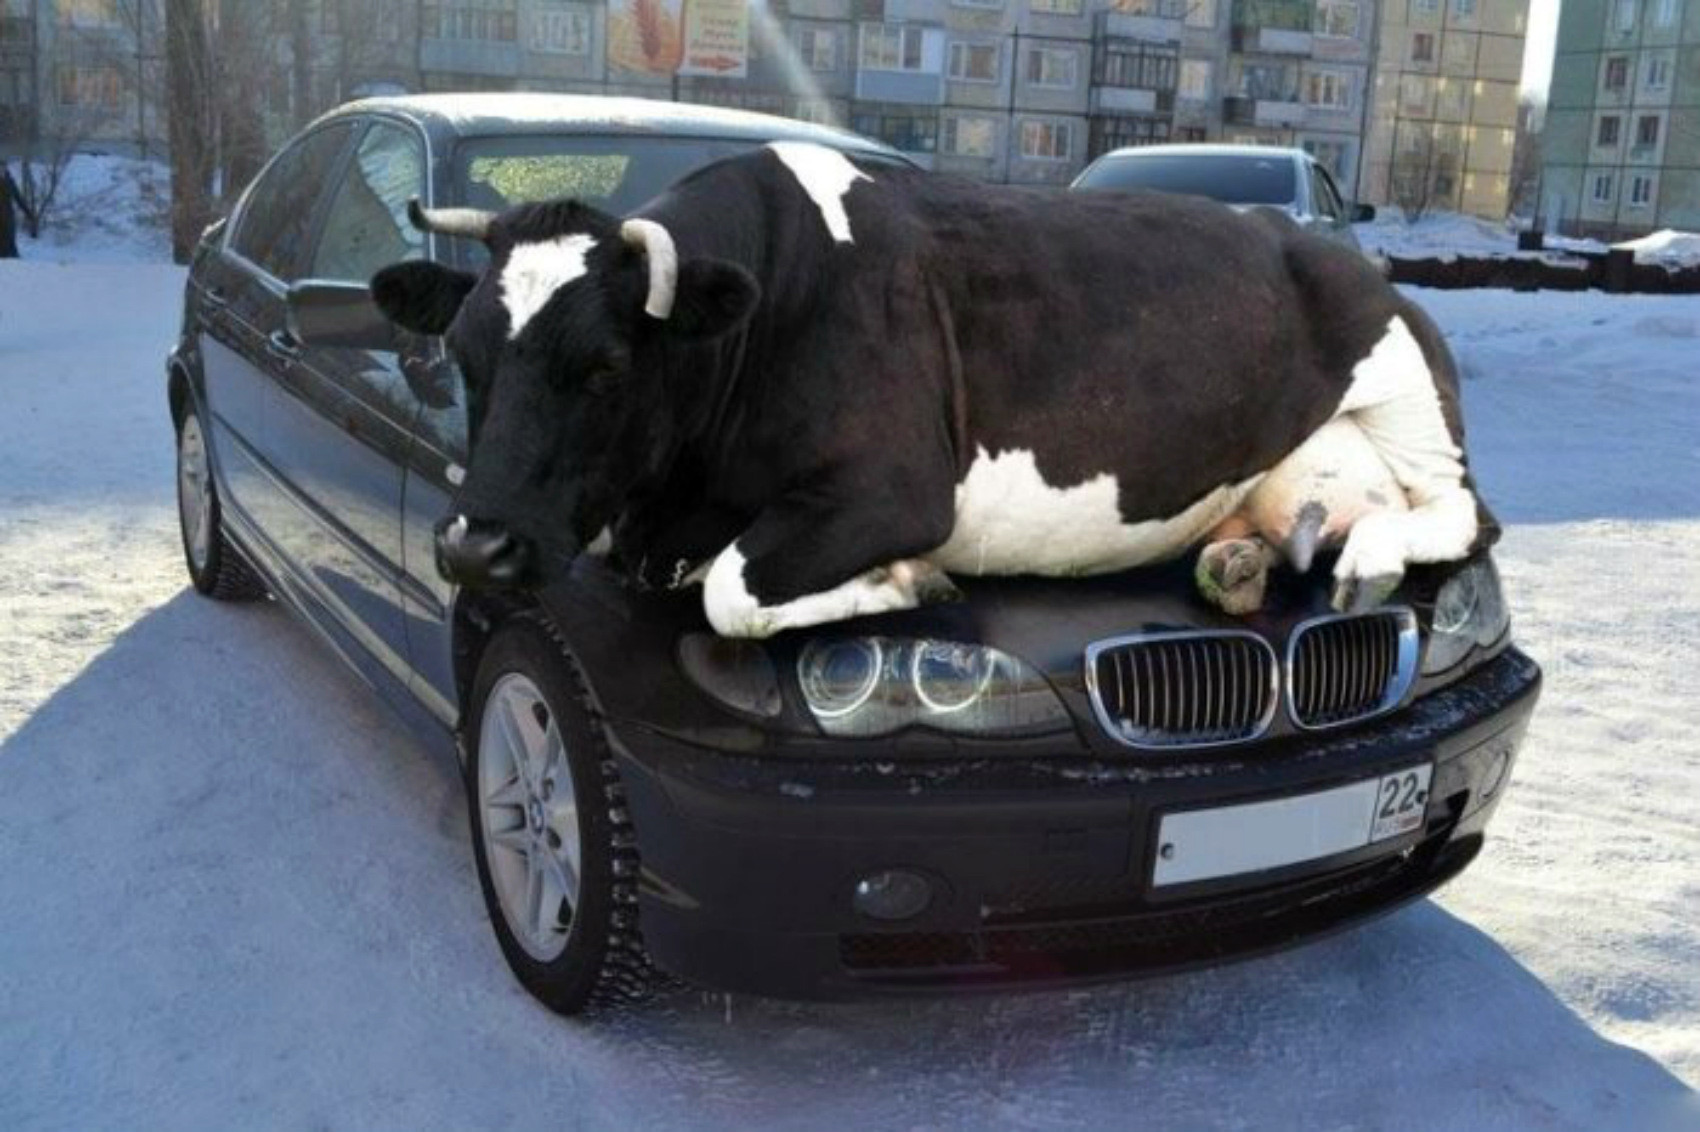 Bull Sitting On Car Bonnet Funny Picture